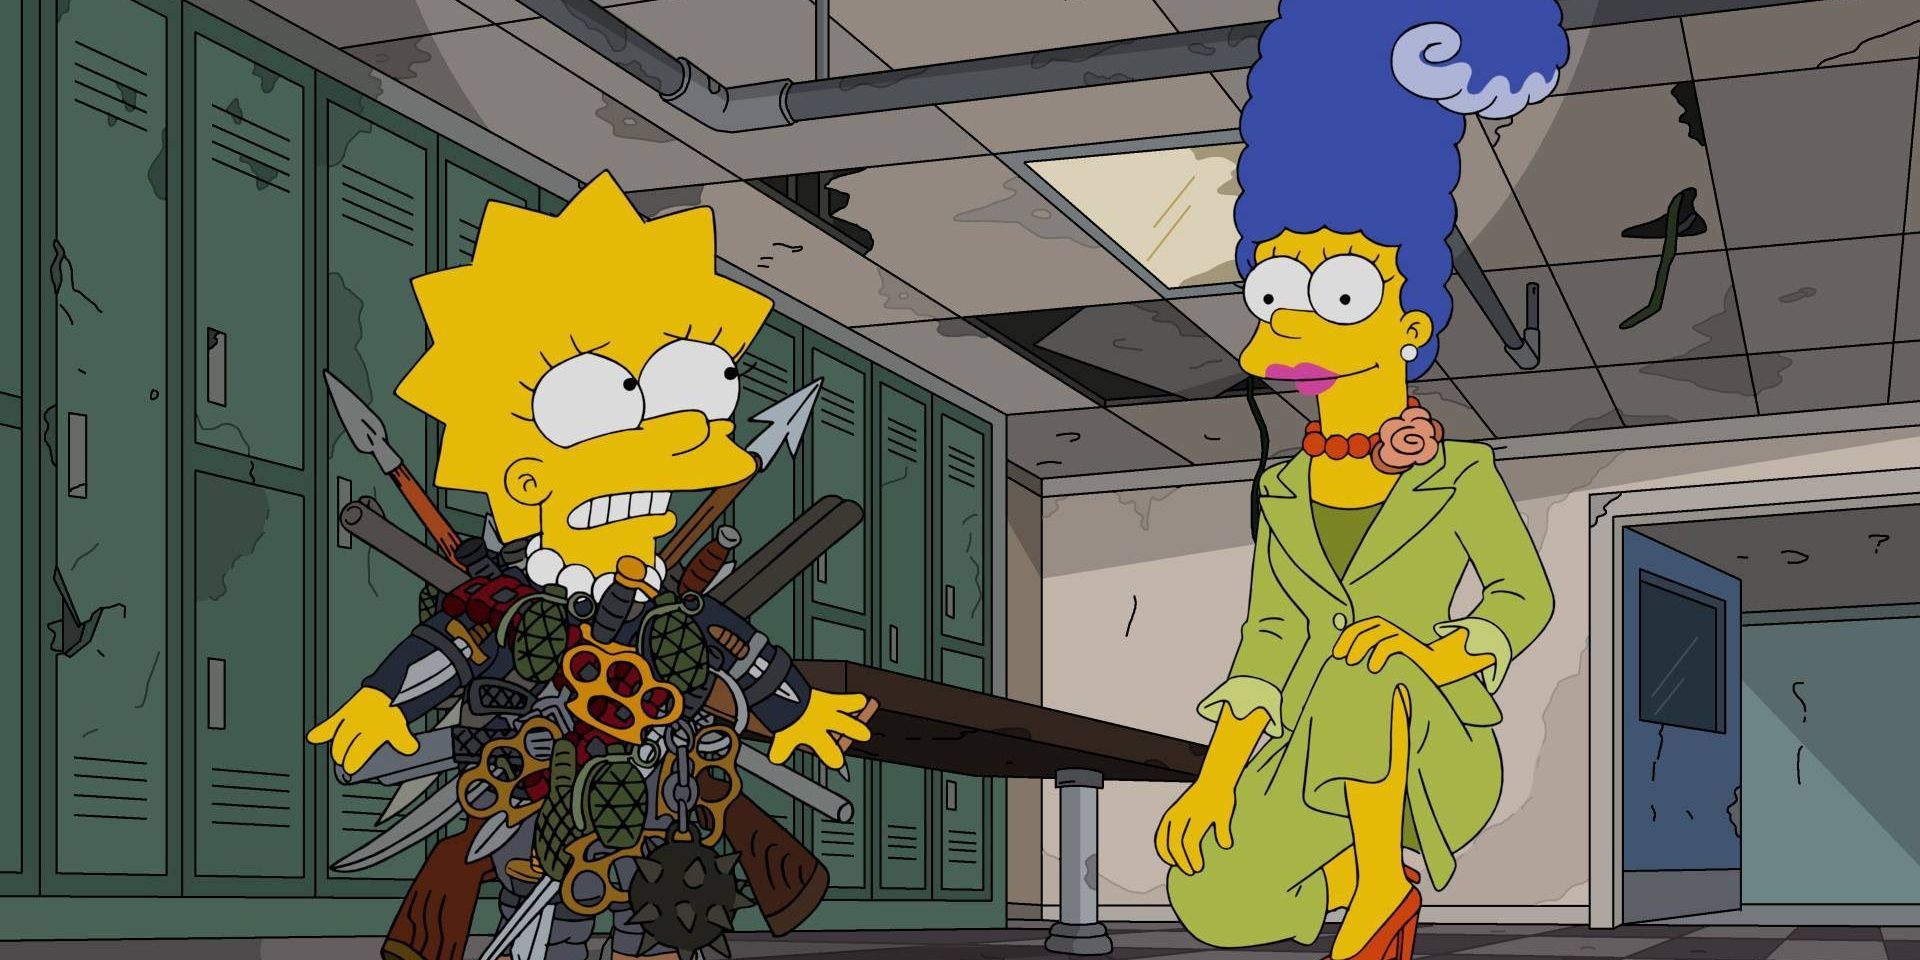 ‘Dry Hard’ (XXVII), Treehouse of Horror, lamest, worst episodes, Lisa, MArge, The hunger games